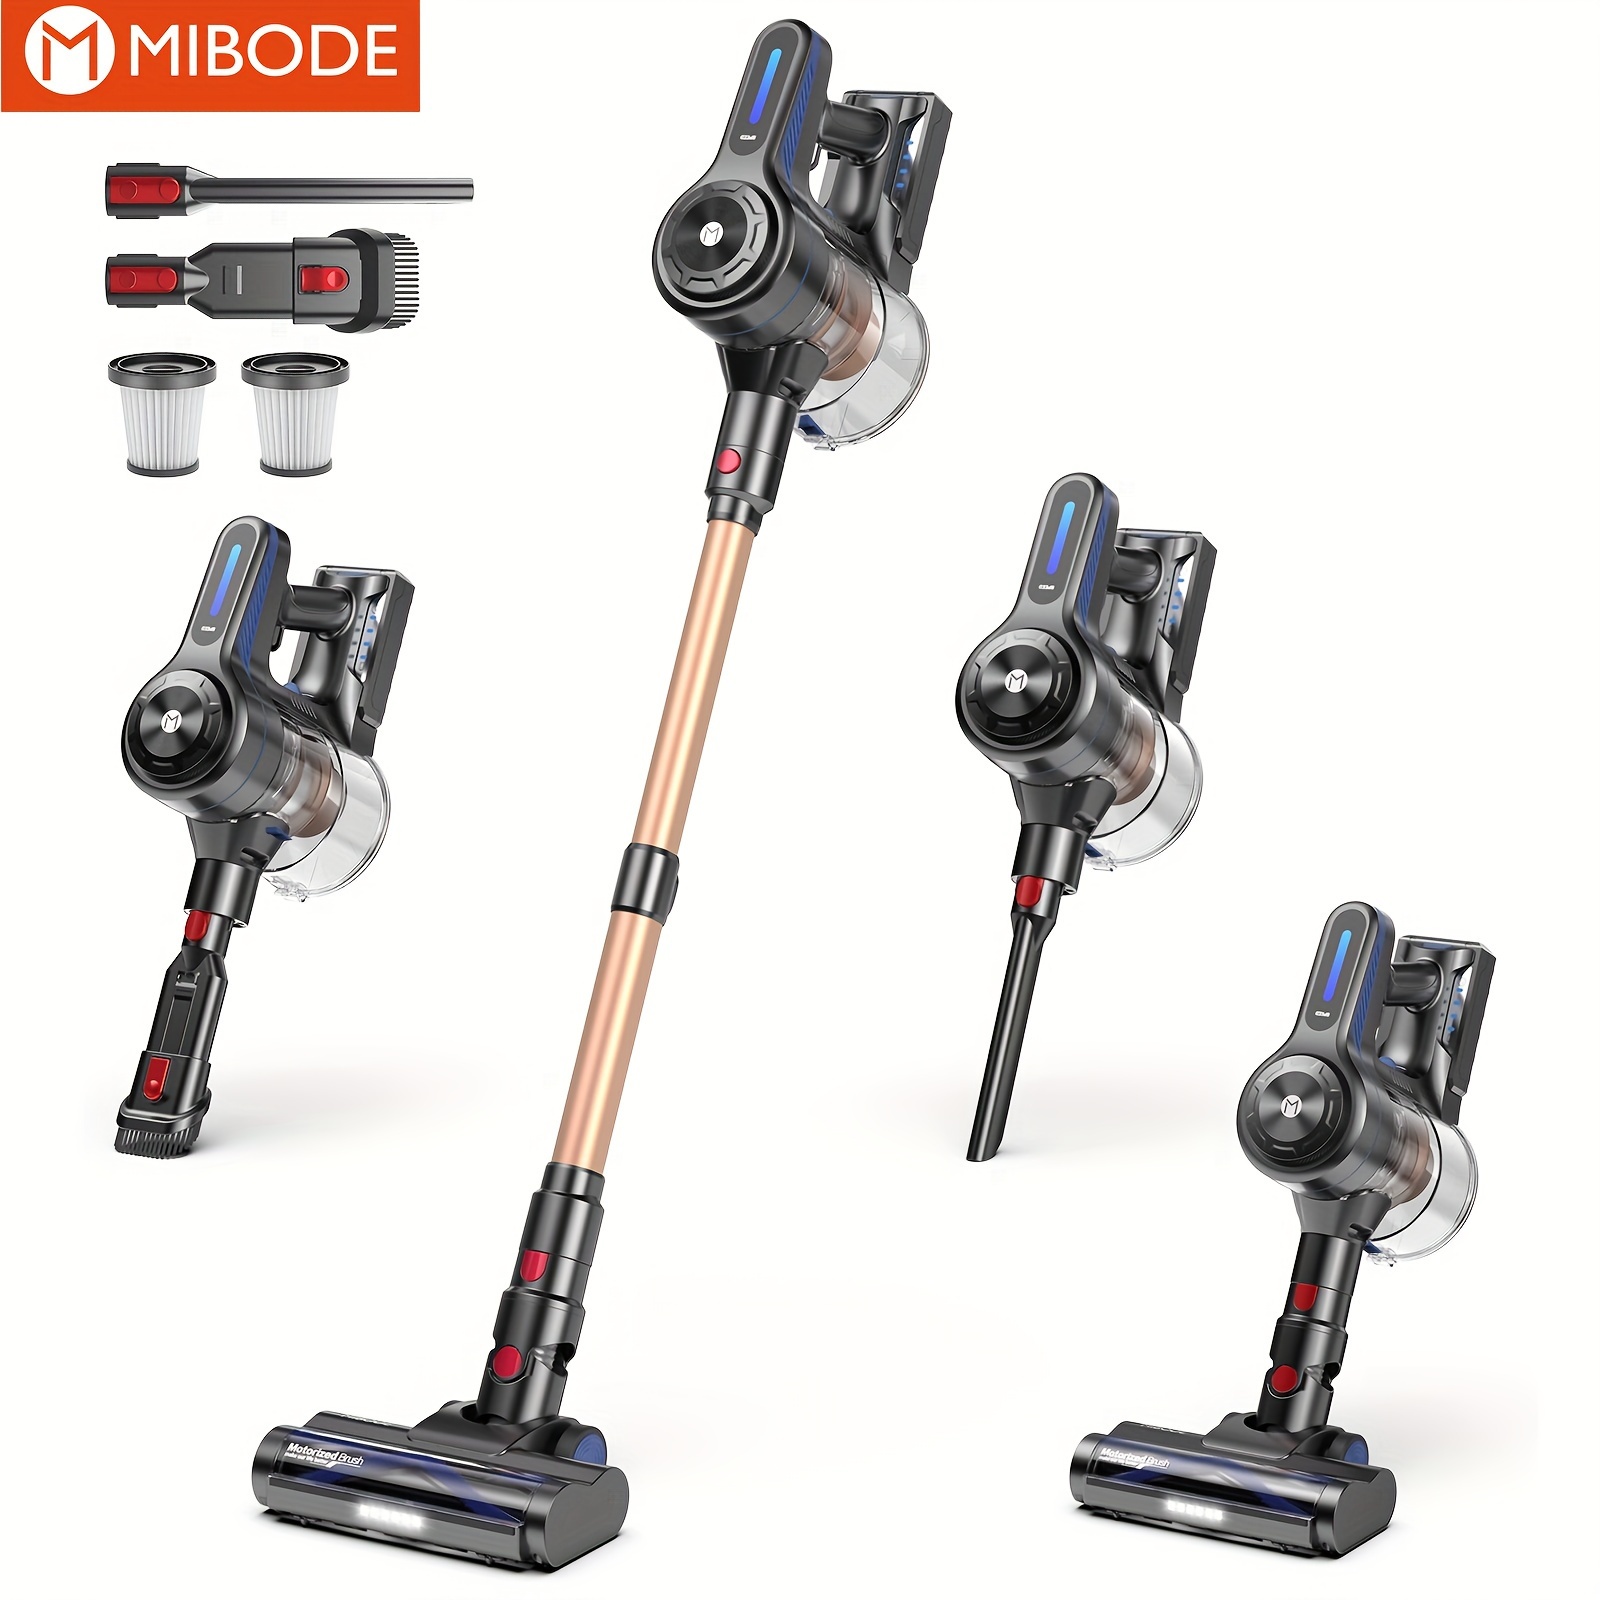 

Mibode Cordless Vacuum Cleaner, 26kpa Powerful Stick Vacuum With 45min Runtime, Anti-tangle Vacuum Cleaners For Home, 1.5l Dust Cup, Rechargeable Wireless Vacuum For Hardwood Floor Carpet Pet Hair